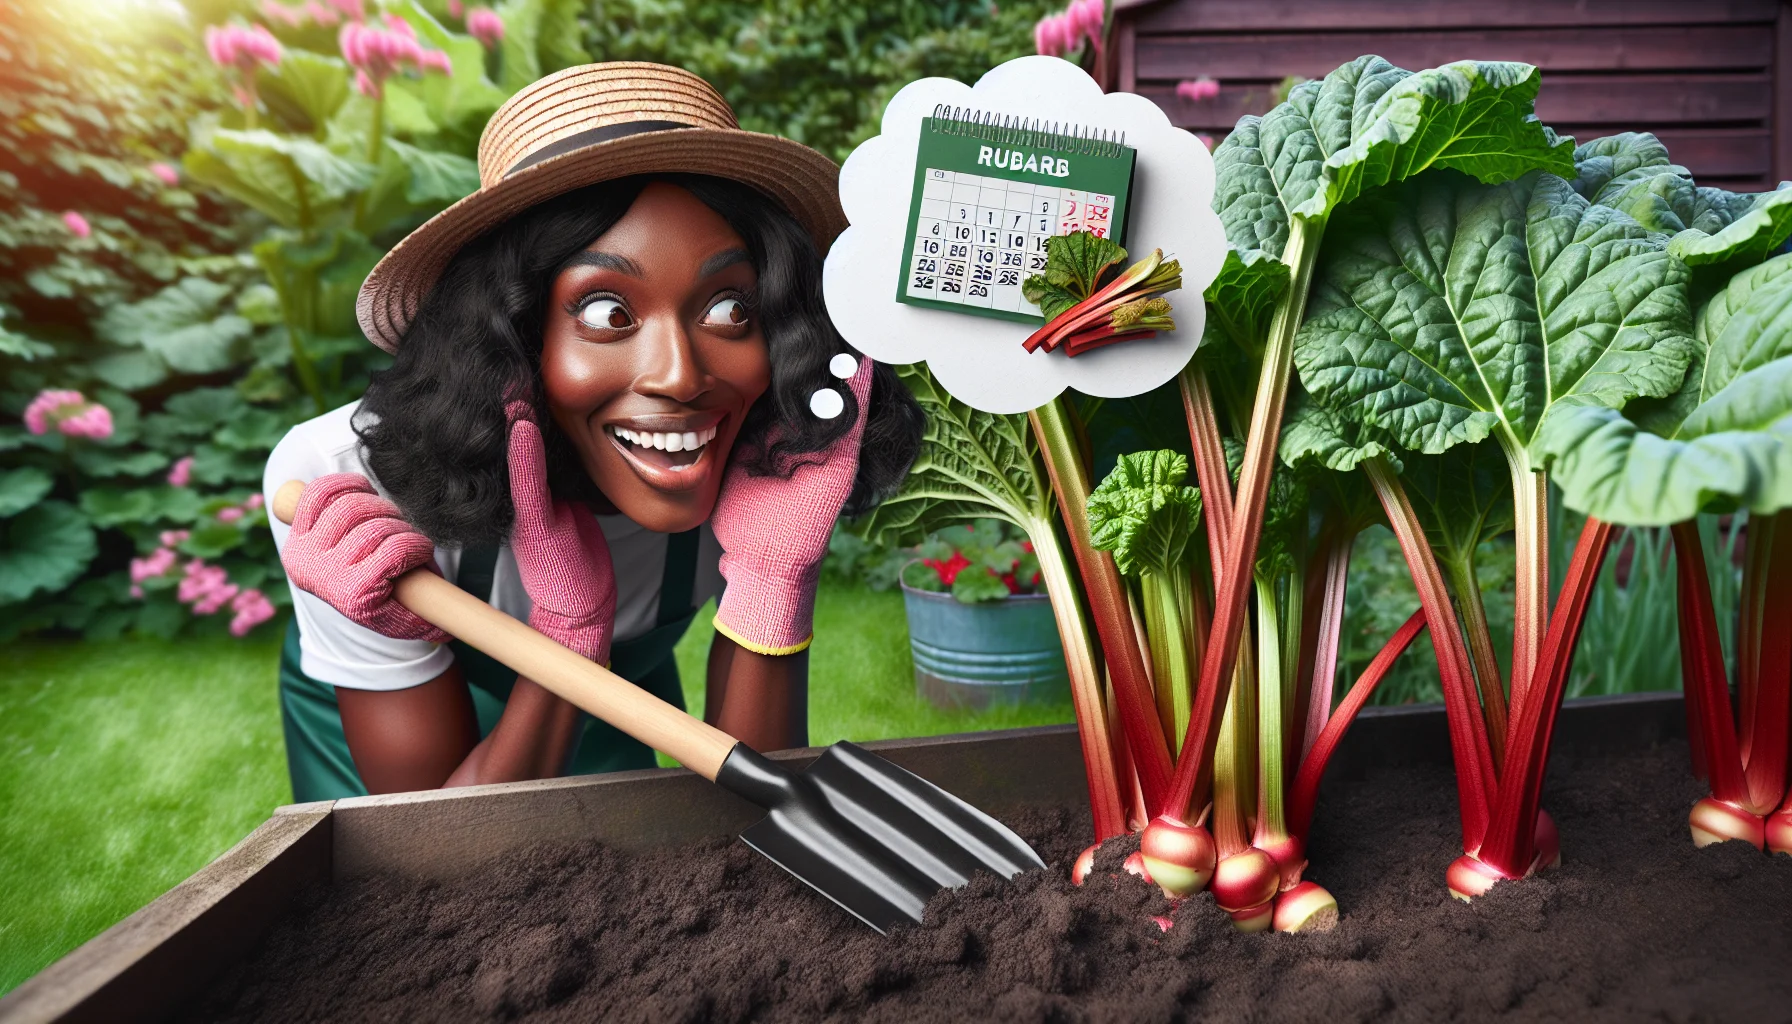 Create an amusing and enticing scene encouraging people towards the joys of gardening. Showcase a Black woman with a twinkle in her eye, wearing a gardener's hat and gloves, kneeling down next to flourishing rhubarb plants in a well-kept garden. Her surprised expression indicates that the rhubarb is bigger than she expected. Include an insinuated thought bubble above her head with a calendar marked with the ideal time for picking rhubarb. Let the settings reveal the happiness that gardening could bring.